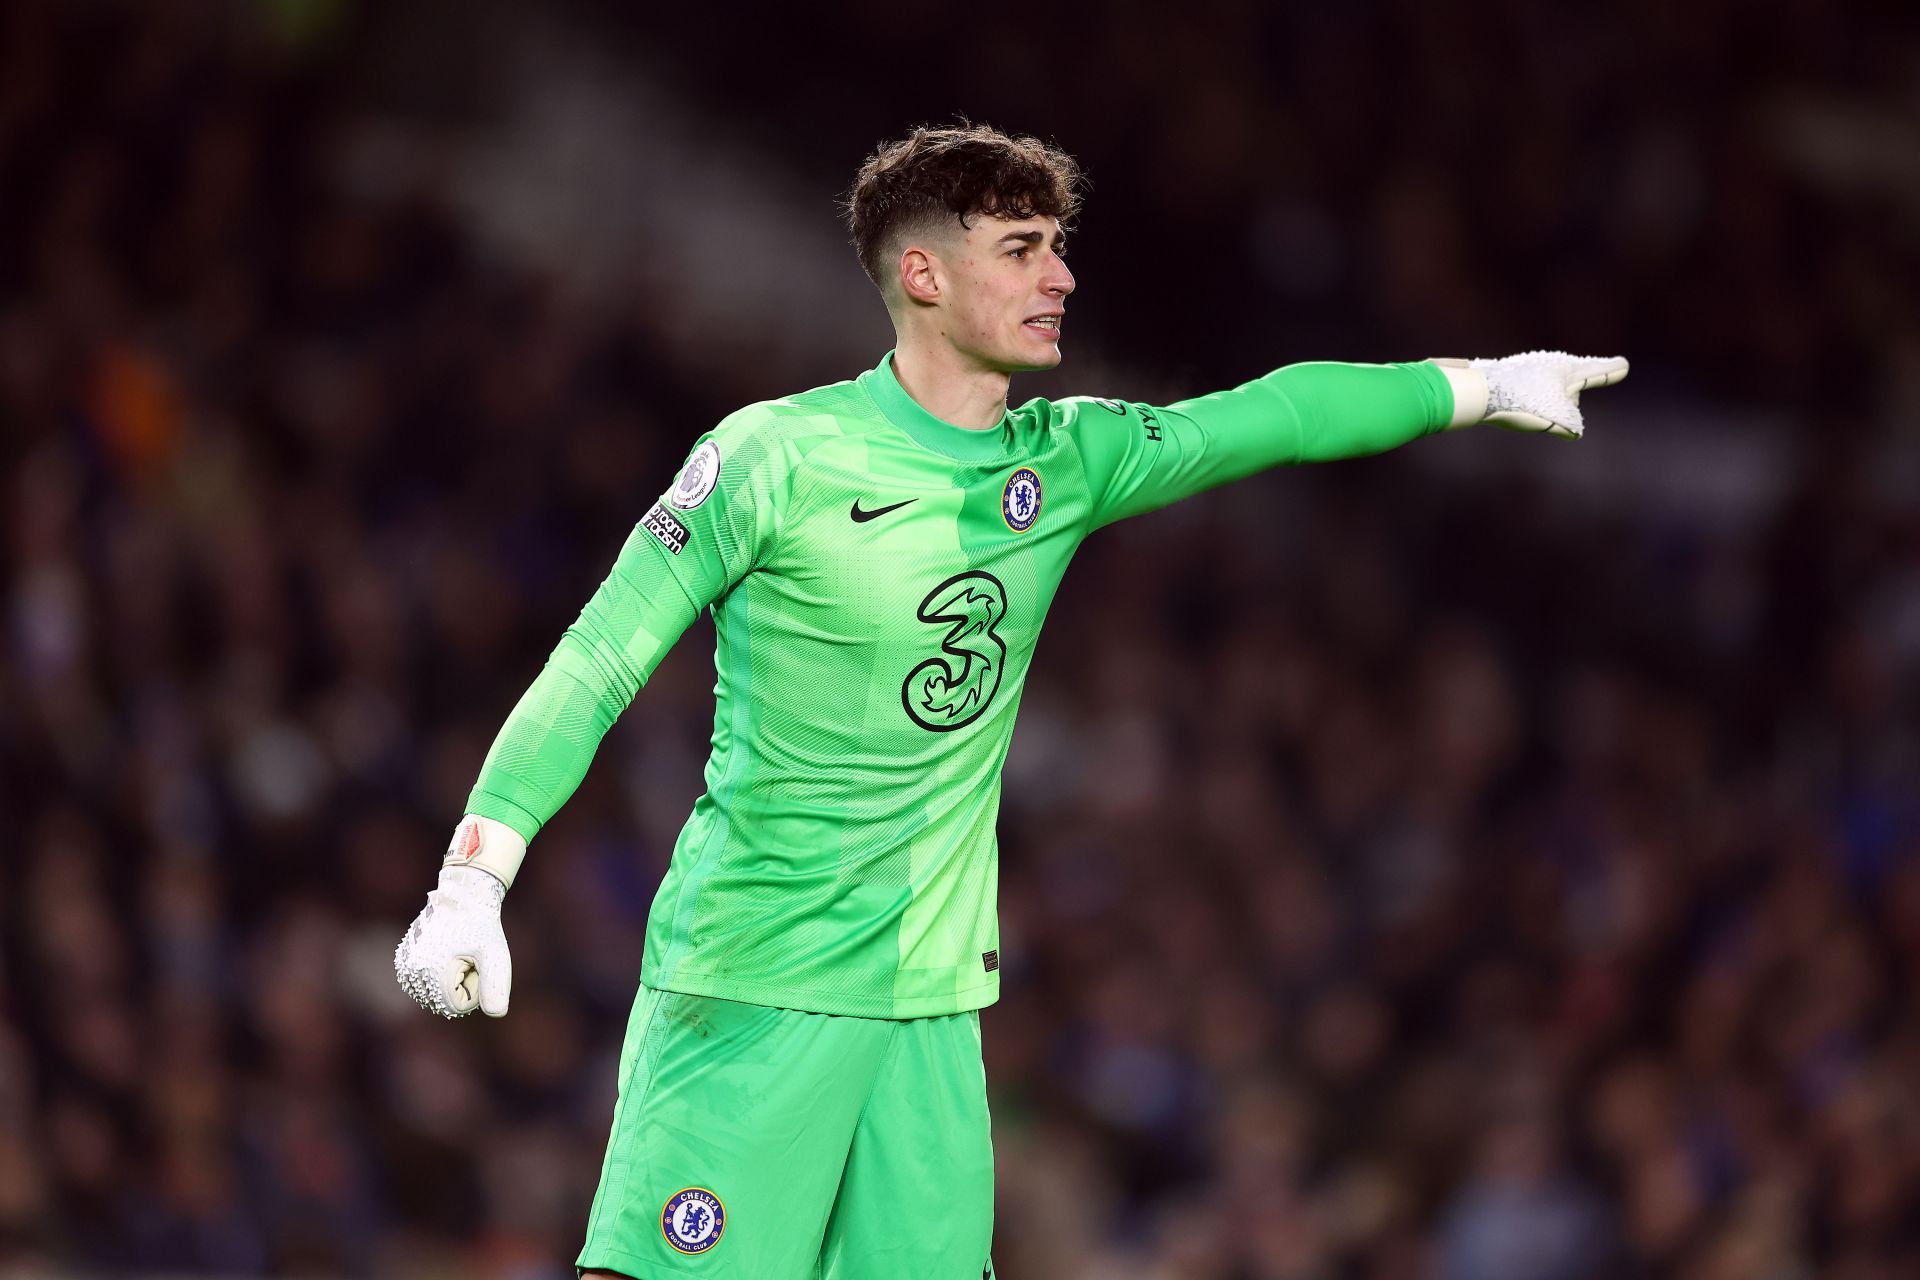 Kepa Arrizabalaga could be on his way to Italy.